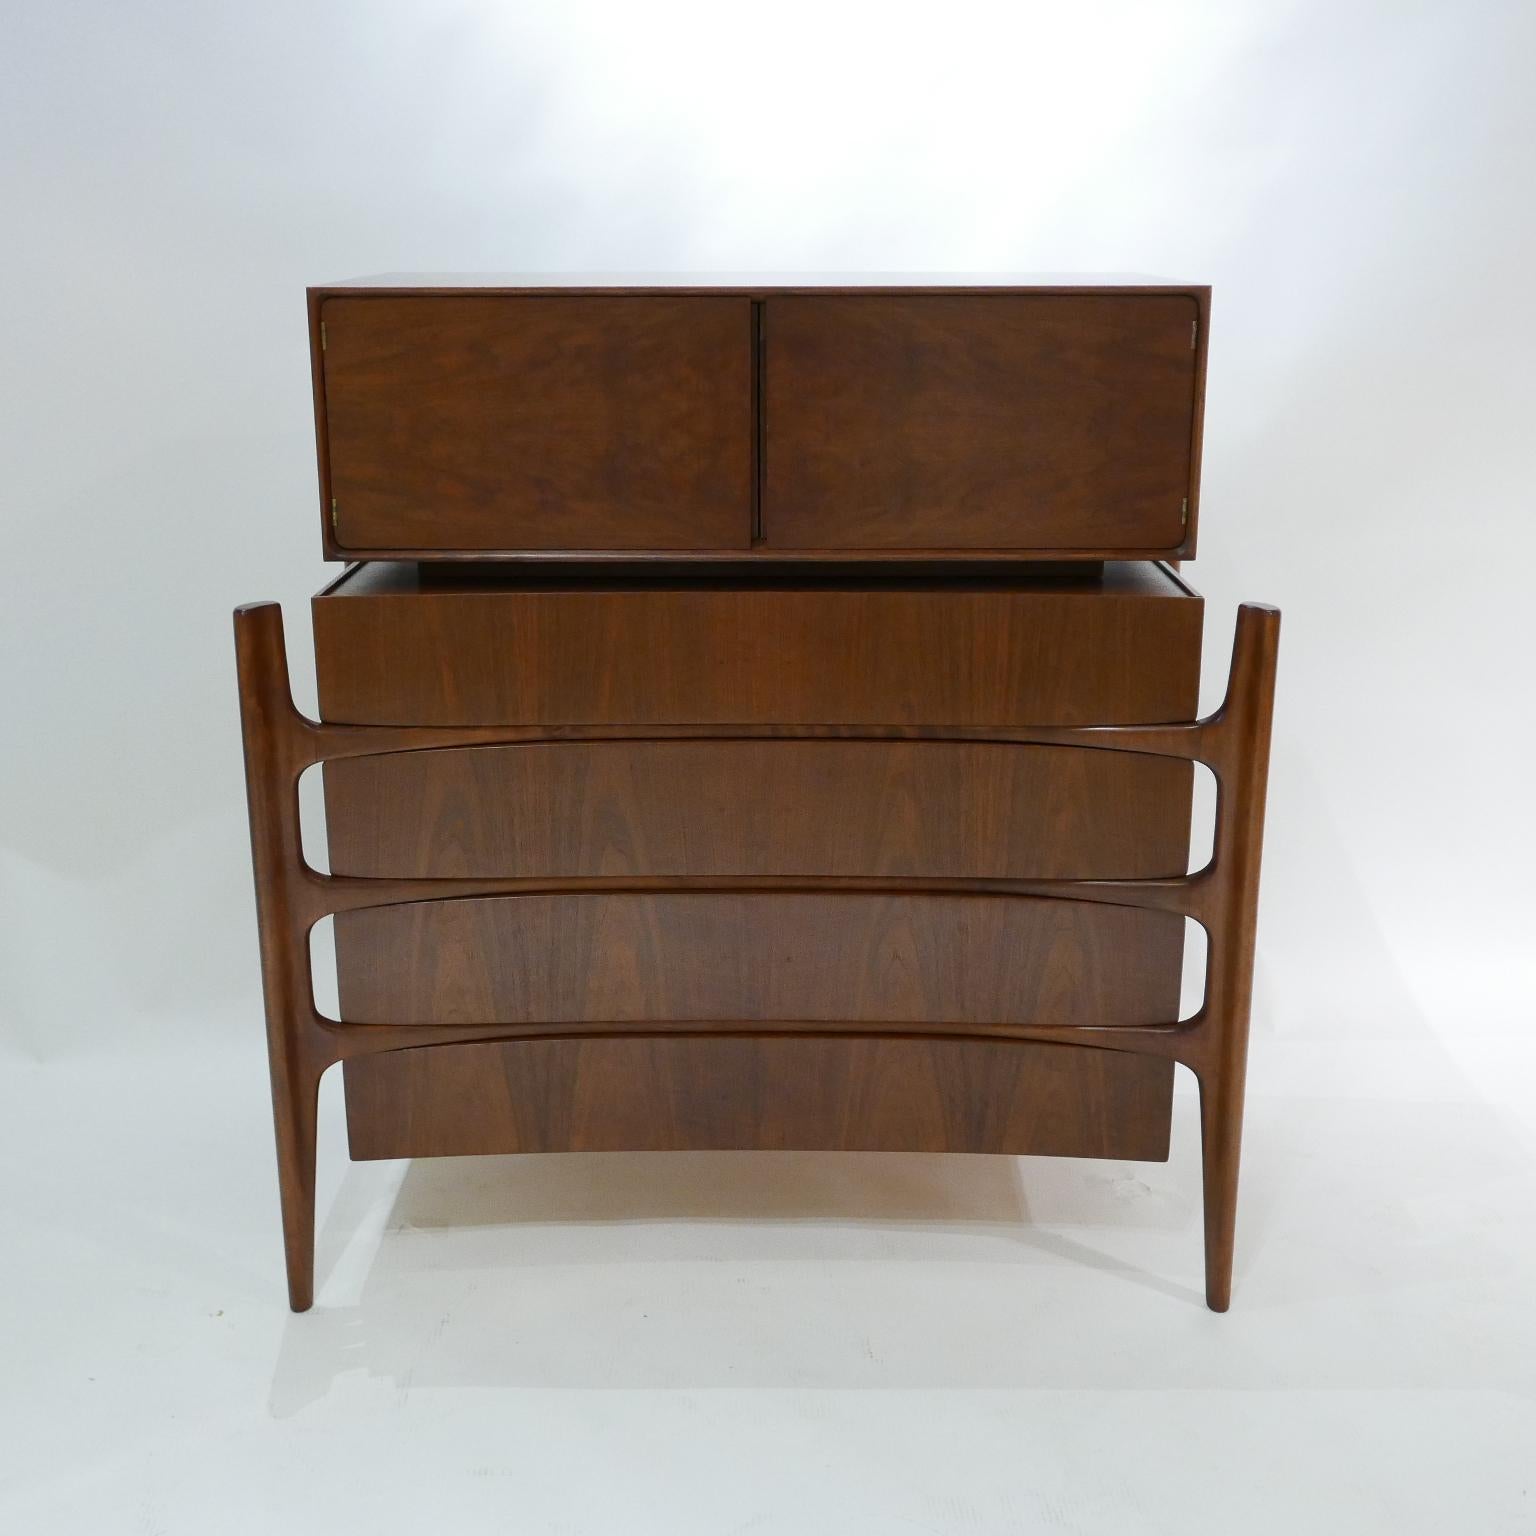 Exposed carved walnut legs with a curved bookmatched walnut front. Beautiful and Sculptural four drawer chest with 2 door top cabinet designed by William Hinn for Urban Furniture's 